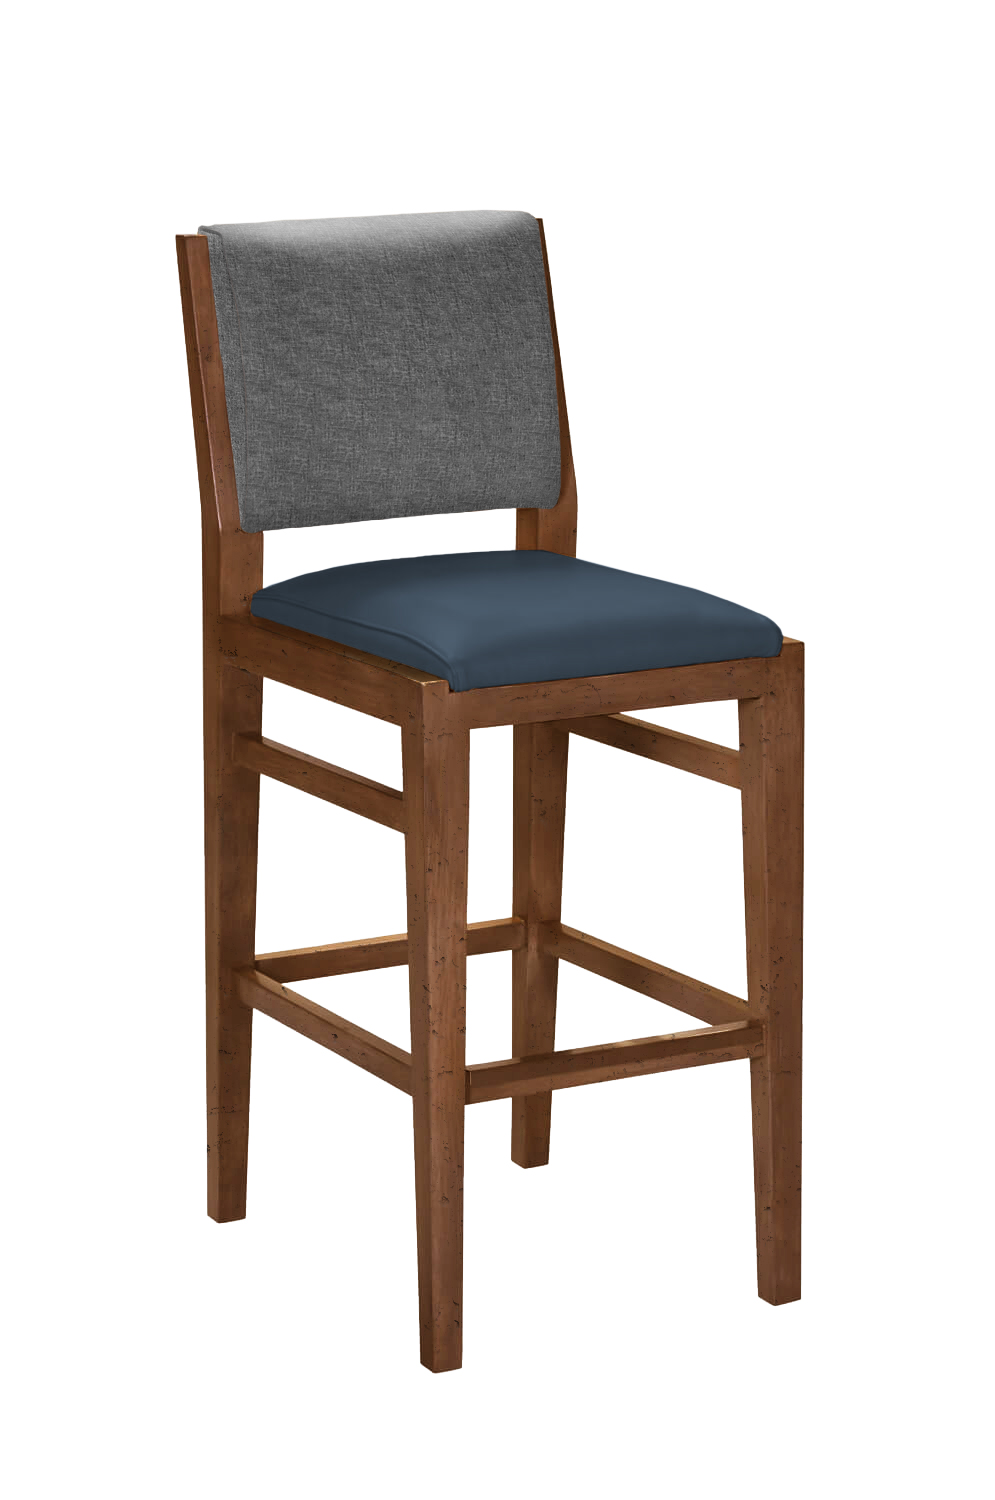 Leathercraft's Bernie Bar Stool in Chanel Prussian and Alexandria Blueberry